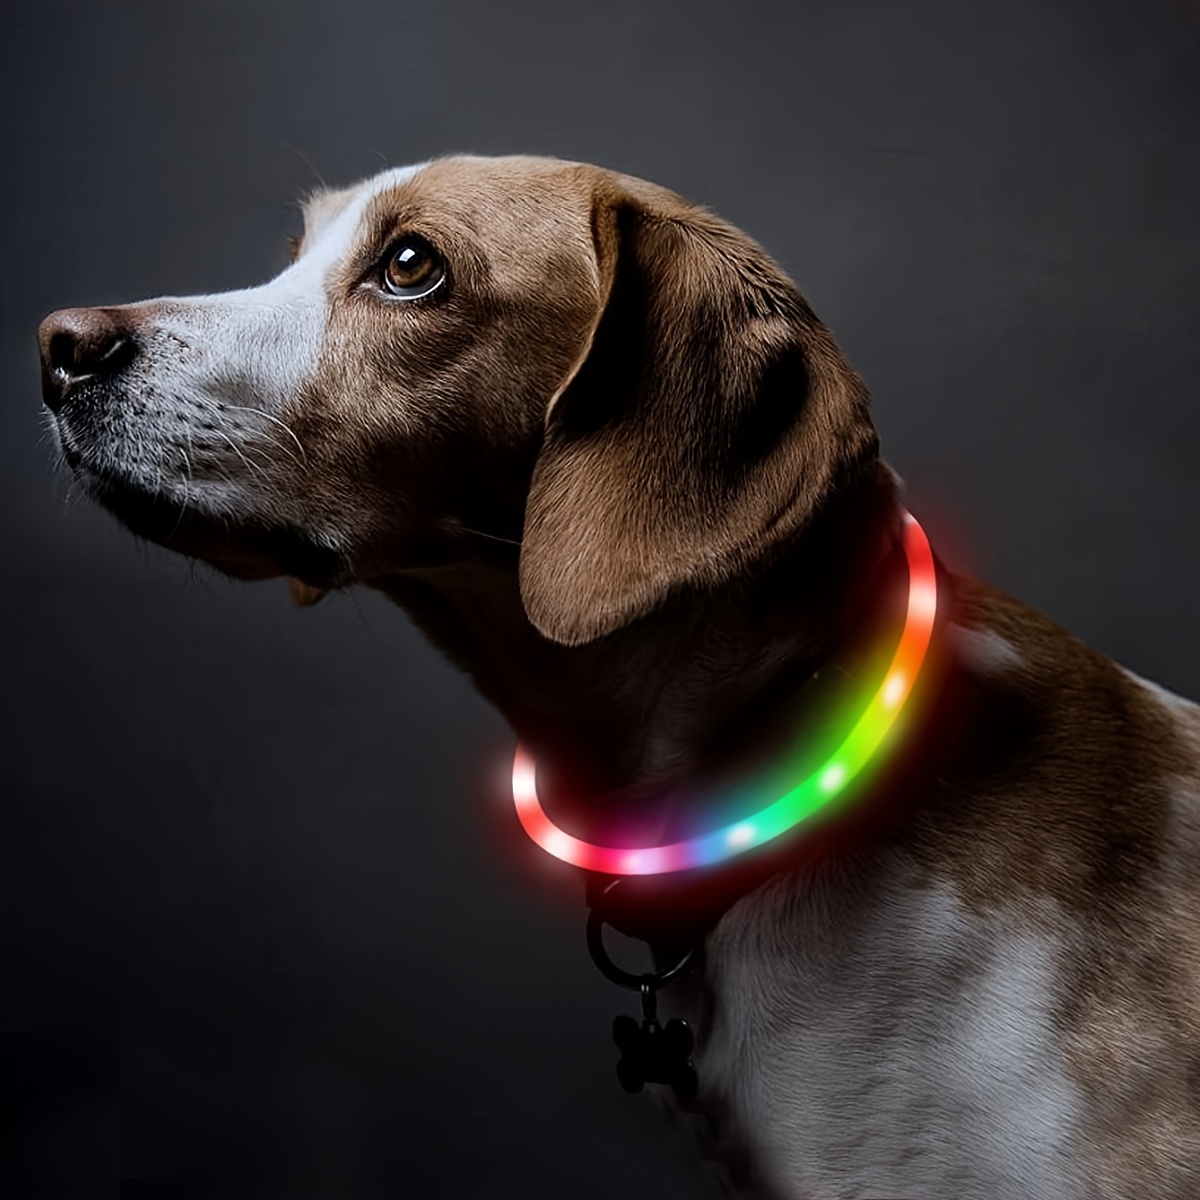 

Led Dog Collar, Polyester Fiber Material, Rechargeable Light-up Pet Safety Necklace, Multicolor Glowing Dog Collar For Night Visibility And Safety, Adjustable For Small Medium Large Dogs